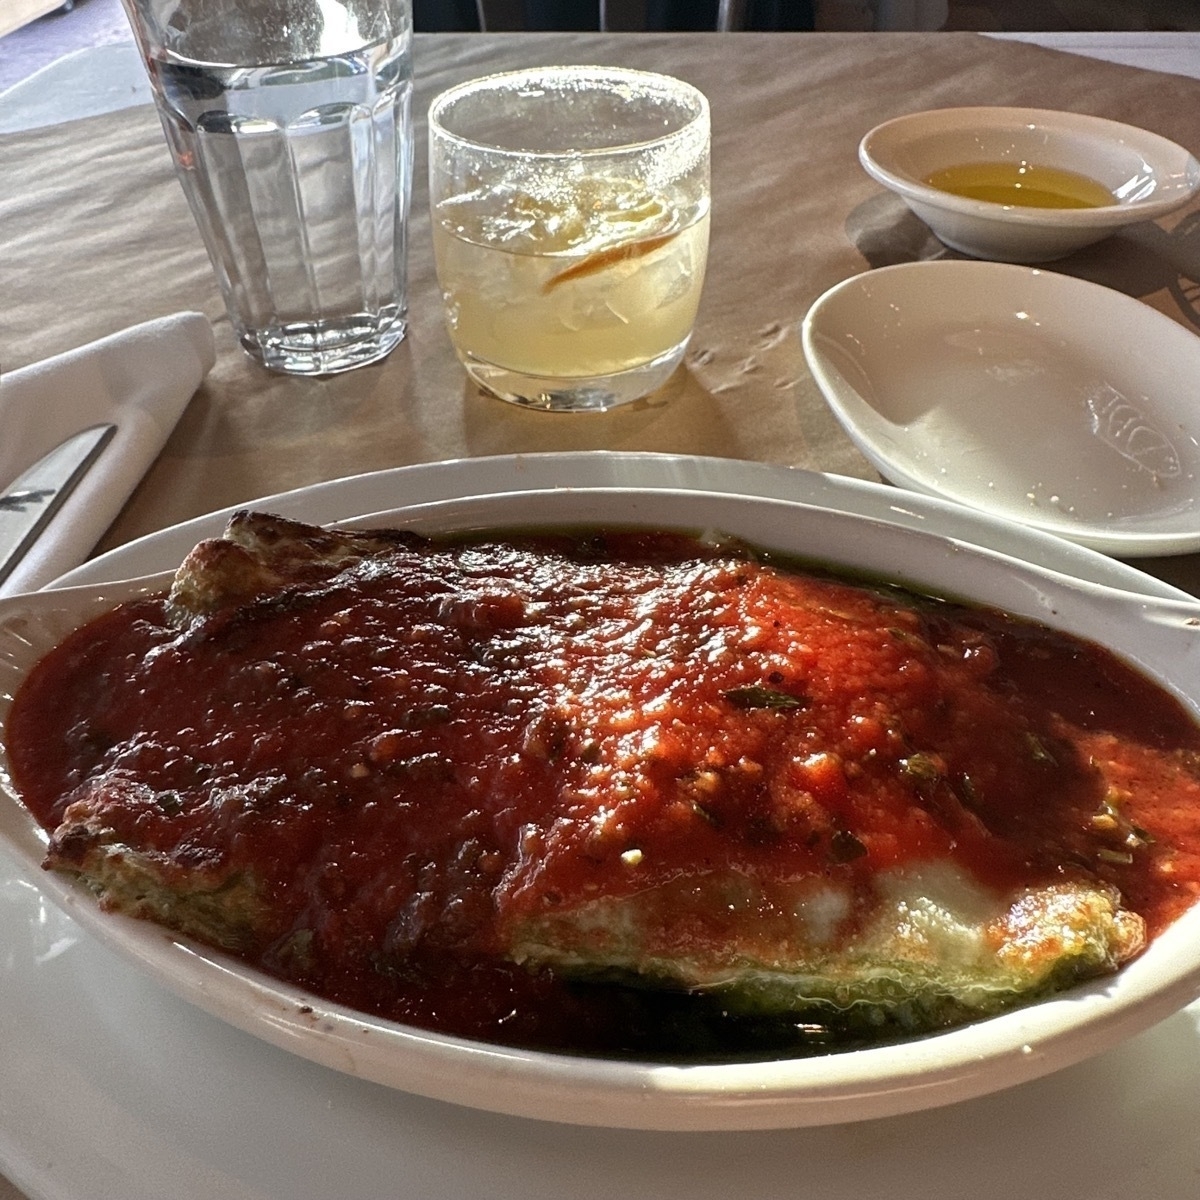 Lasagna in a boat shaped porcelain white plate, with a yellow drink behind.